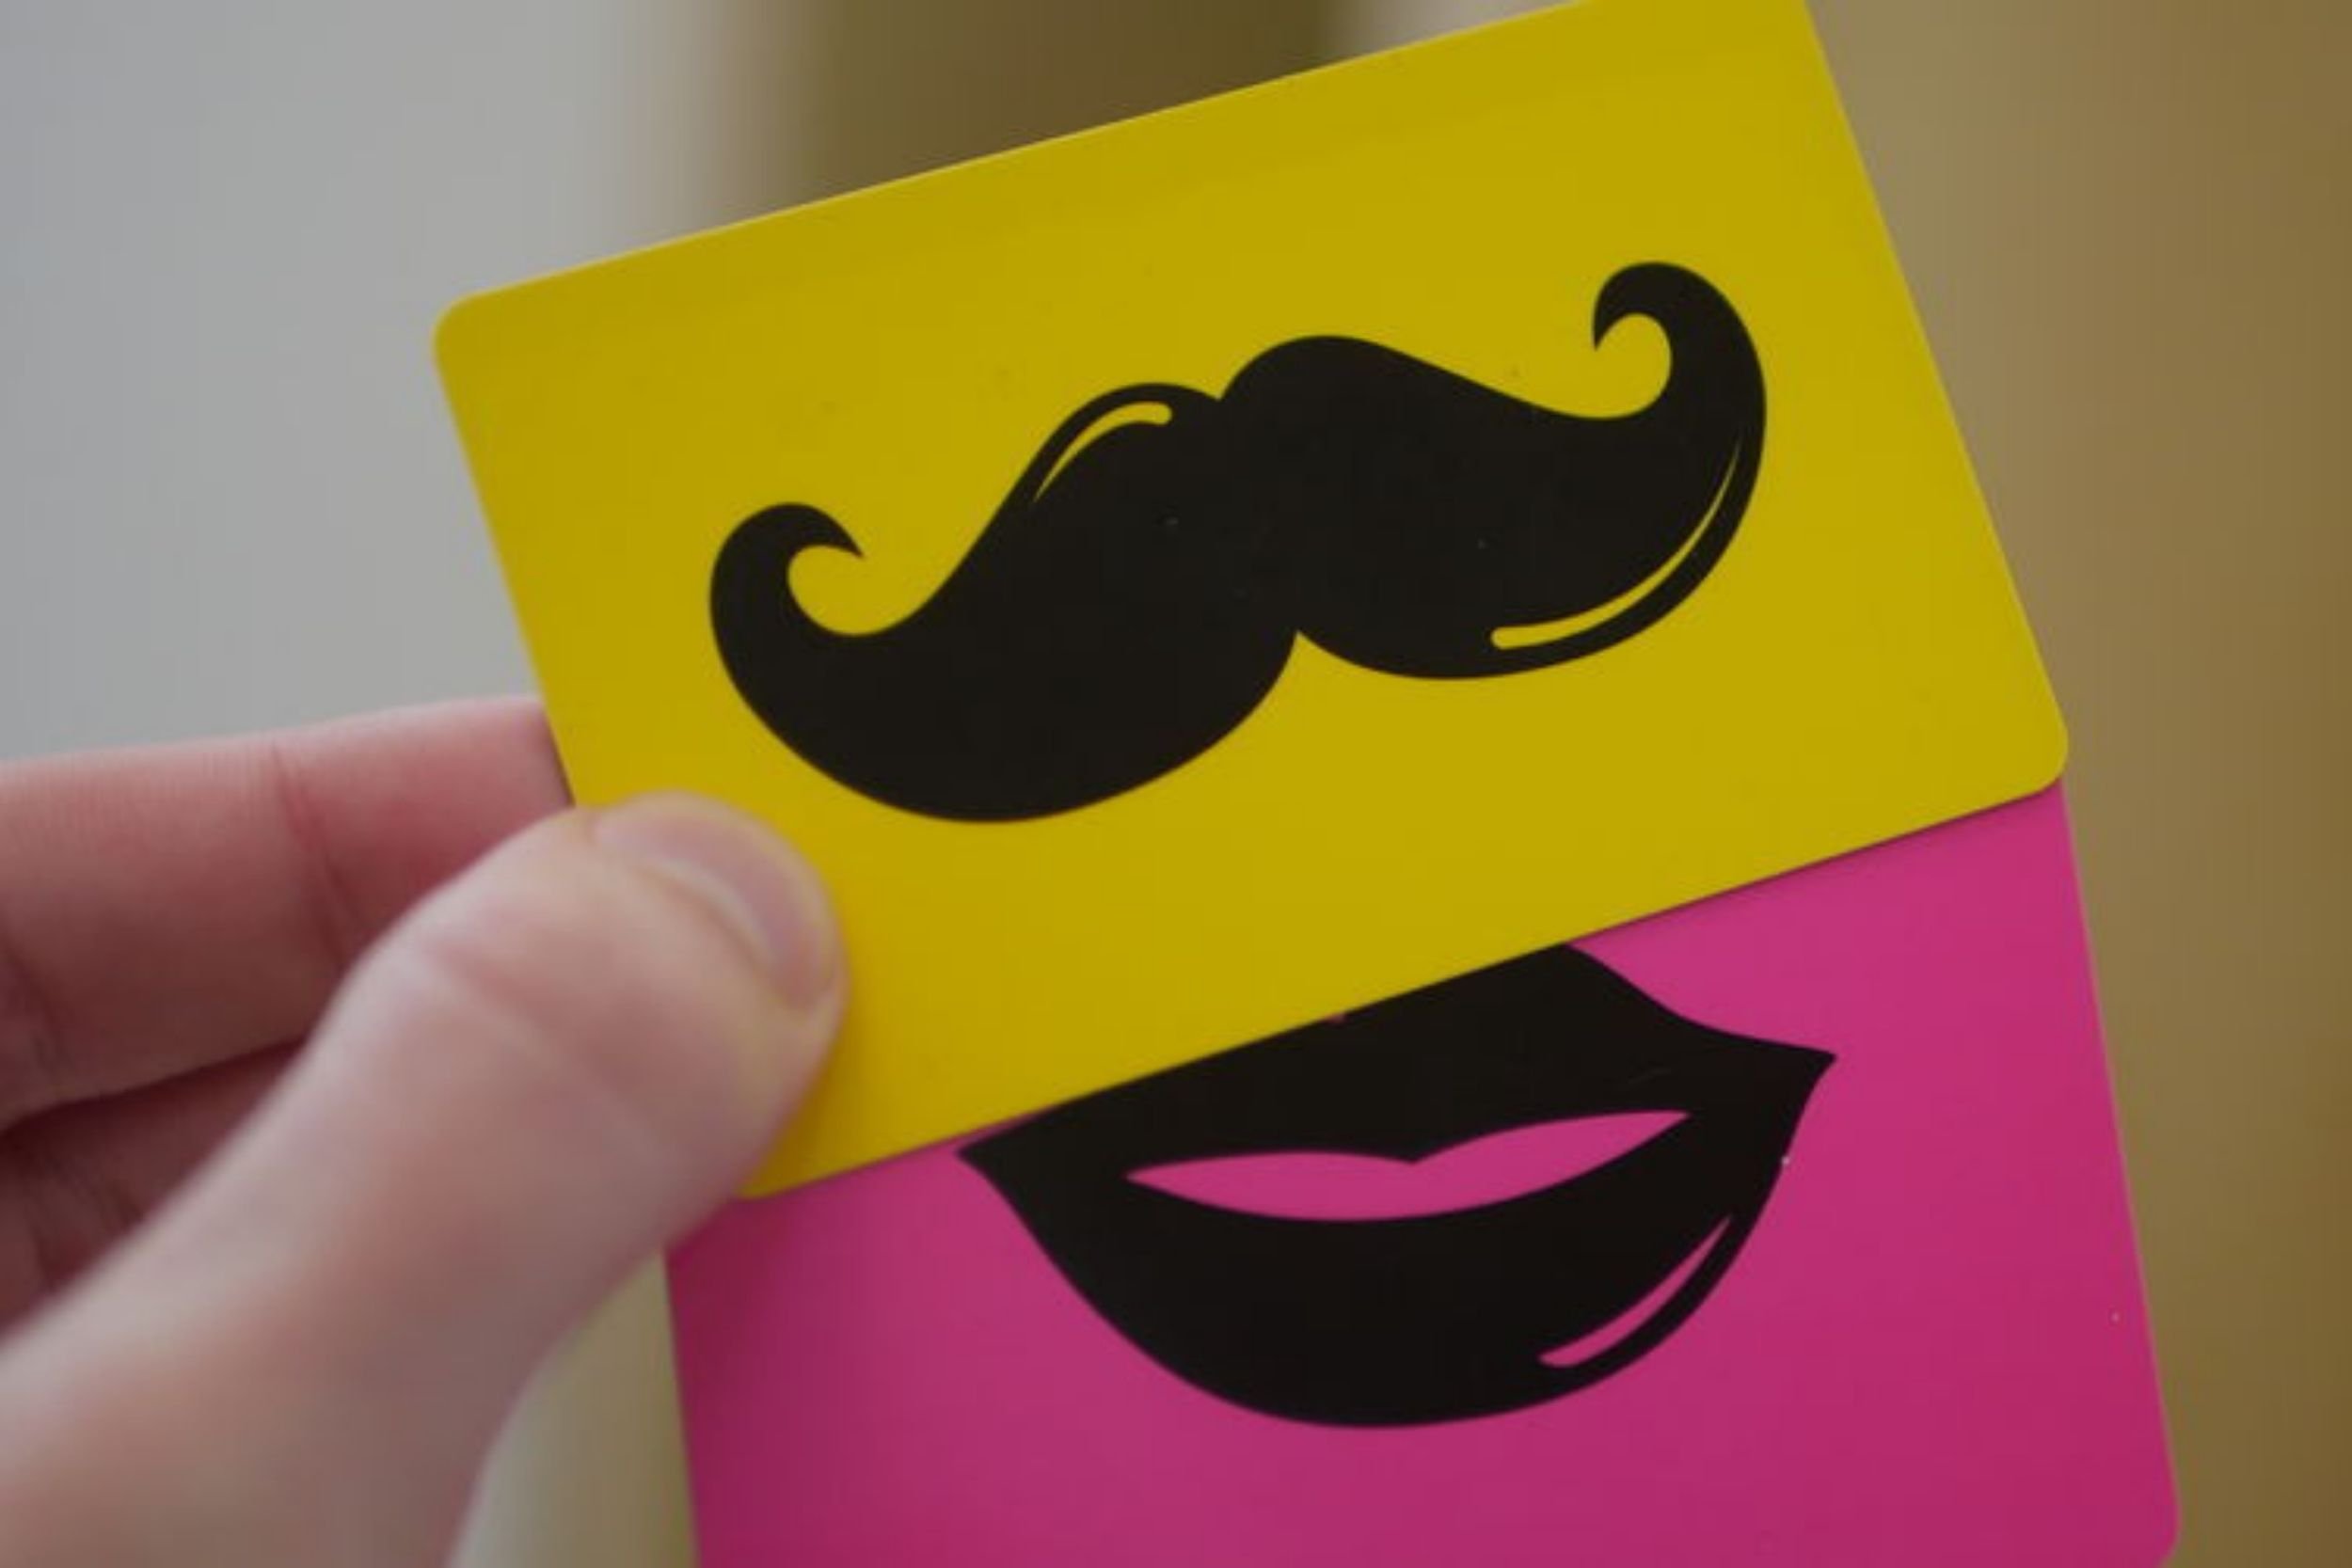 a yellow and a pink bespoke access control cards with a moustache and lip motifs